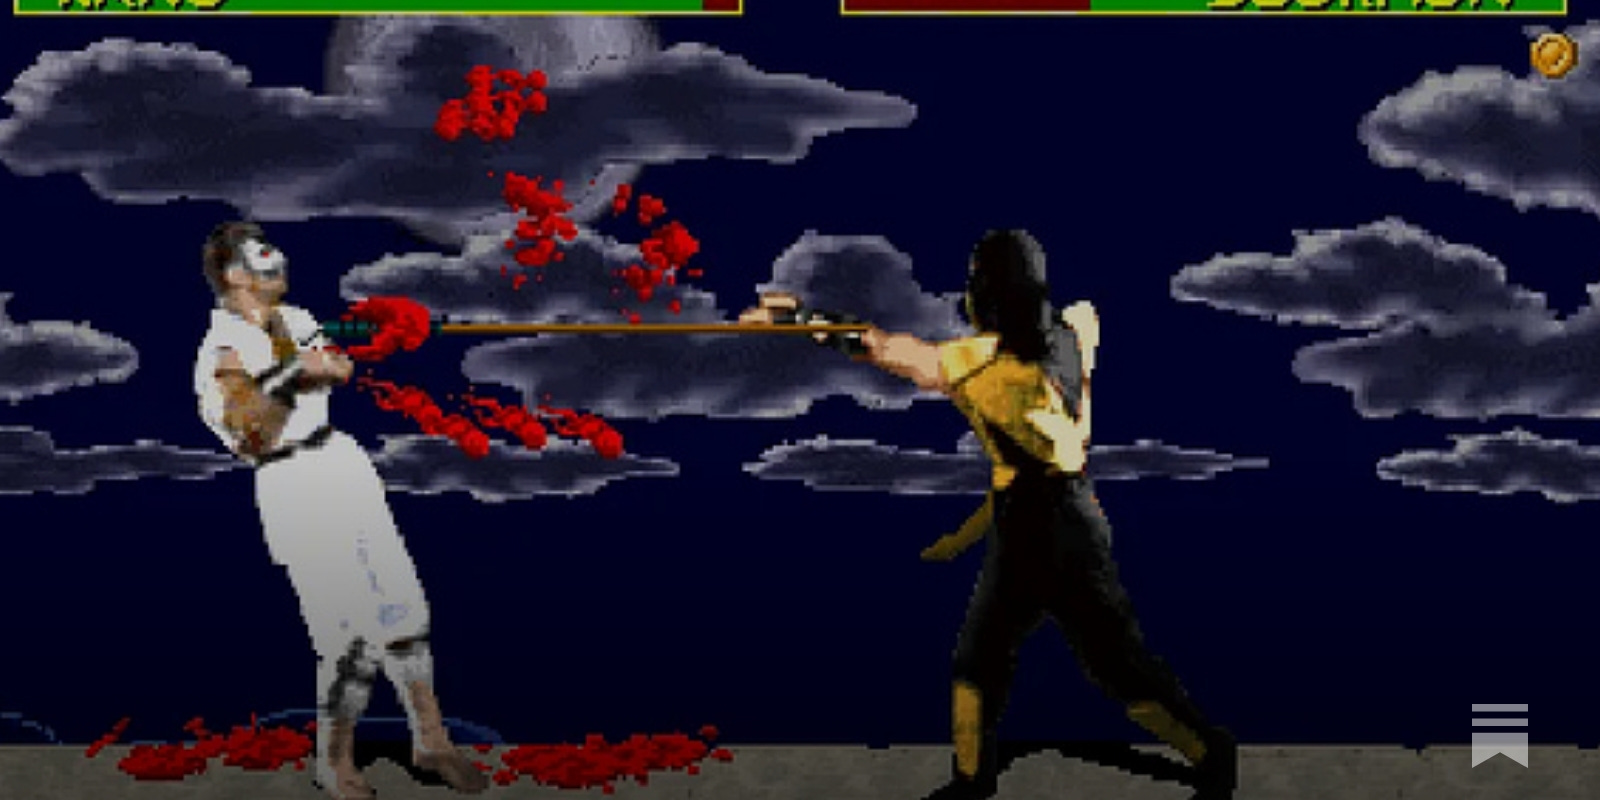 Anyone else's game freeze on these Brutality/Fatality screens? : r/ MortalKombat